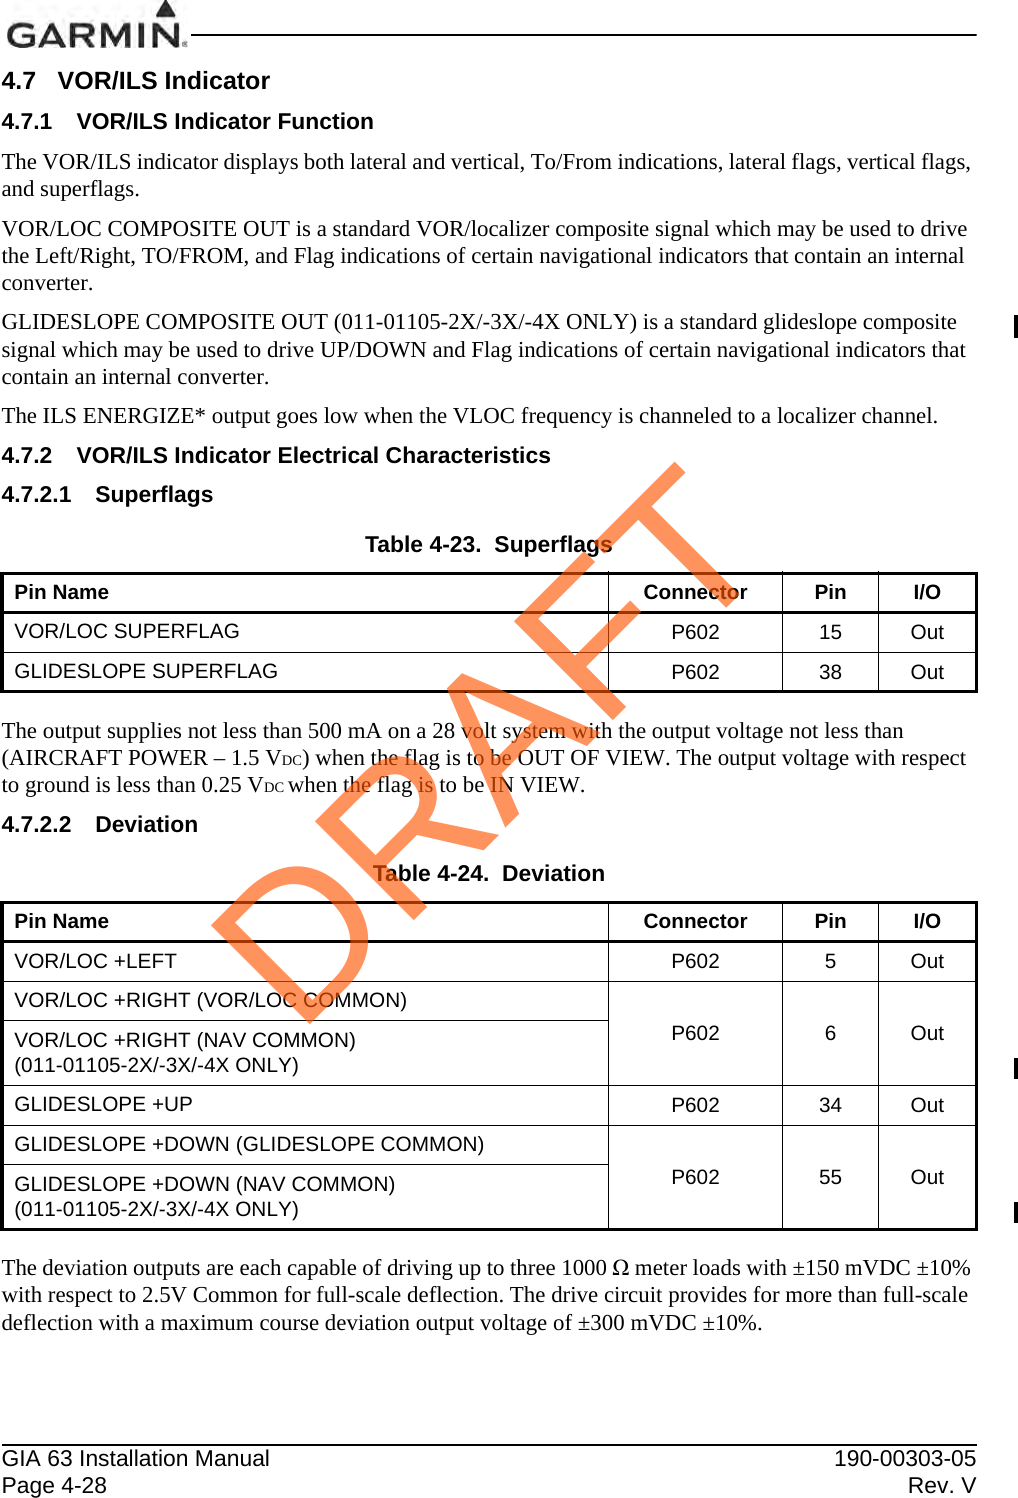 GIA 63 Installation Manual 190-00303-05Page 4-28 Rev. V4.7 VOR/ILS Indicator4.7.1 VOR/ILS Indicator FunctionThe VOR/ILS indicator displays both lateral and vertical, To/From indications, lateral flags, vertical flags, and superflags.VOR/LOC COMPOSITE OUT is a standard VOR/localizer composite signal which may be used to drive the Left/Right, TO/FROM, and Flag indications of certain navigational indicators that contain an internal converter.GLIDESLOPE COMPOSITE OUT (011-01105-2X/-3X/-4X ONLY) is a standard glideslope composite signal which may be used to drive UP/DOWN and Flag indications of certain navigational indicators that contain an internal converter.The ILS ENERGIZE* output goes low when the VLOC frequency is channeled to a localizer channel.4.7.2 VOR/ILS Indicator Electrical Characteristics4.7.2.1 SuperflagsThe output supplies not less than 500 mA on a 28 volt system with the output voltage not less than (AIRCRAFT POWER – 1.5 VDC) when the flag is to be OUT OF VIEW. The output voltage with respect to ground is less than 0.25 VDC when the flag is to be IN VIEW.4.7.2.2 DeviationThe deviation outputs are each capable of driving up to three 1000 Ω meter loads with ±150 mVDC ±10% with respect to 2.5V Common for full-scale deflection. The drive circuit provides for more than full-scale deflection with a maximum course deviation output voltage of ±300 mVDC ±10%.Table 4-23.  SuperflagsPin Name Connector Pin I/OVOR/LOC SUPERFLAG P602 15 OutGLIDESLOPE SUPERFLAG P602 38 OutTable 4-24.  DeviationPin Name Connector Pin I/OVOR/LOC +LEFT P602 5OutVOR/LOC +RIGHT (VOR/LOC COMMON)P602 6OutVOR/LOC +RIGHT (NAV COMMON)(011-01105-2X/-3X/-4X ONLY)GLIDESLOPE +UP P602 34 OutGLIDESLOPE +DOWN (GLIDESLOPE COMMON)P602 55 OutGLIDESLOPE +DOWN (NAV COMMON)(011-01105-2X/-3X/-4X ONLY)DRAFT